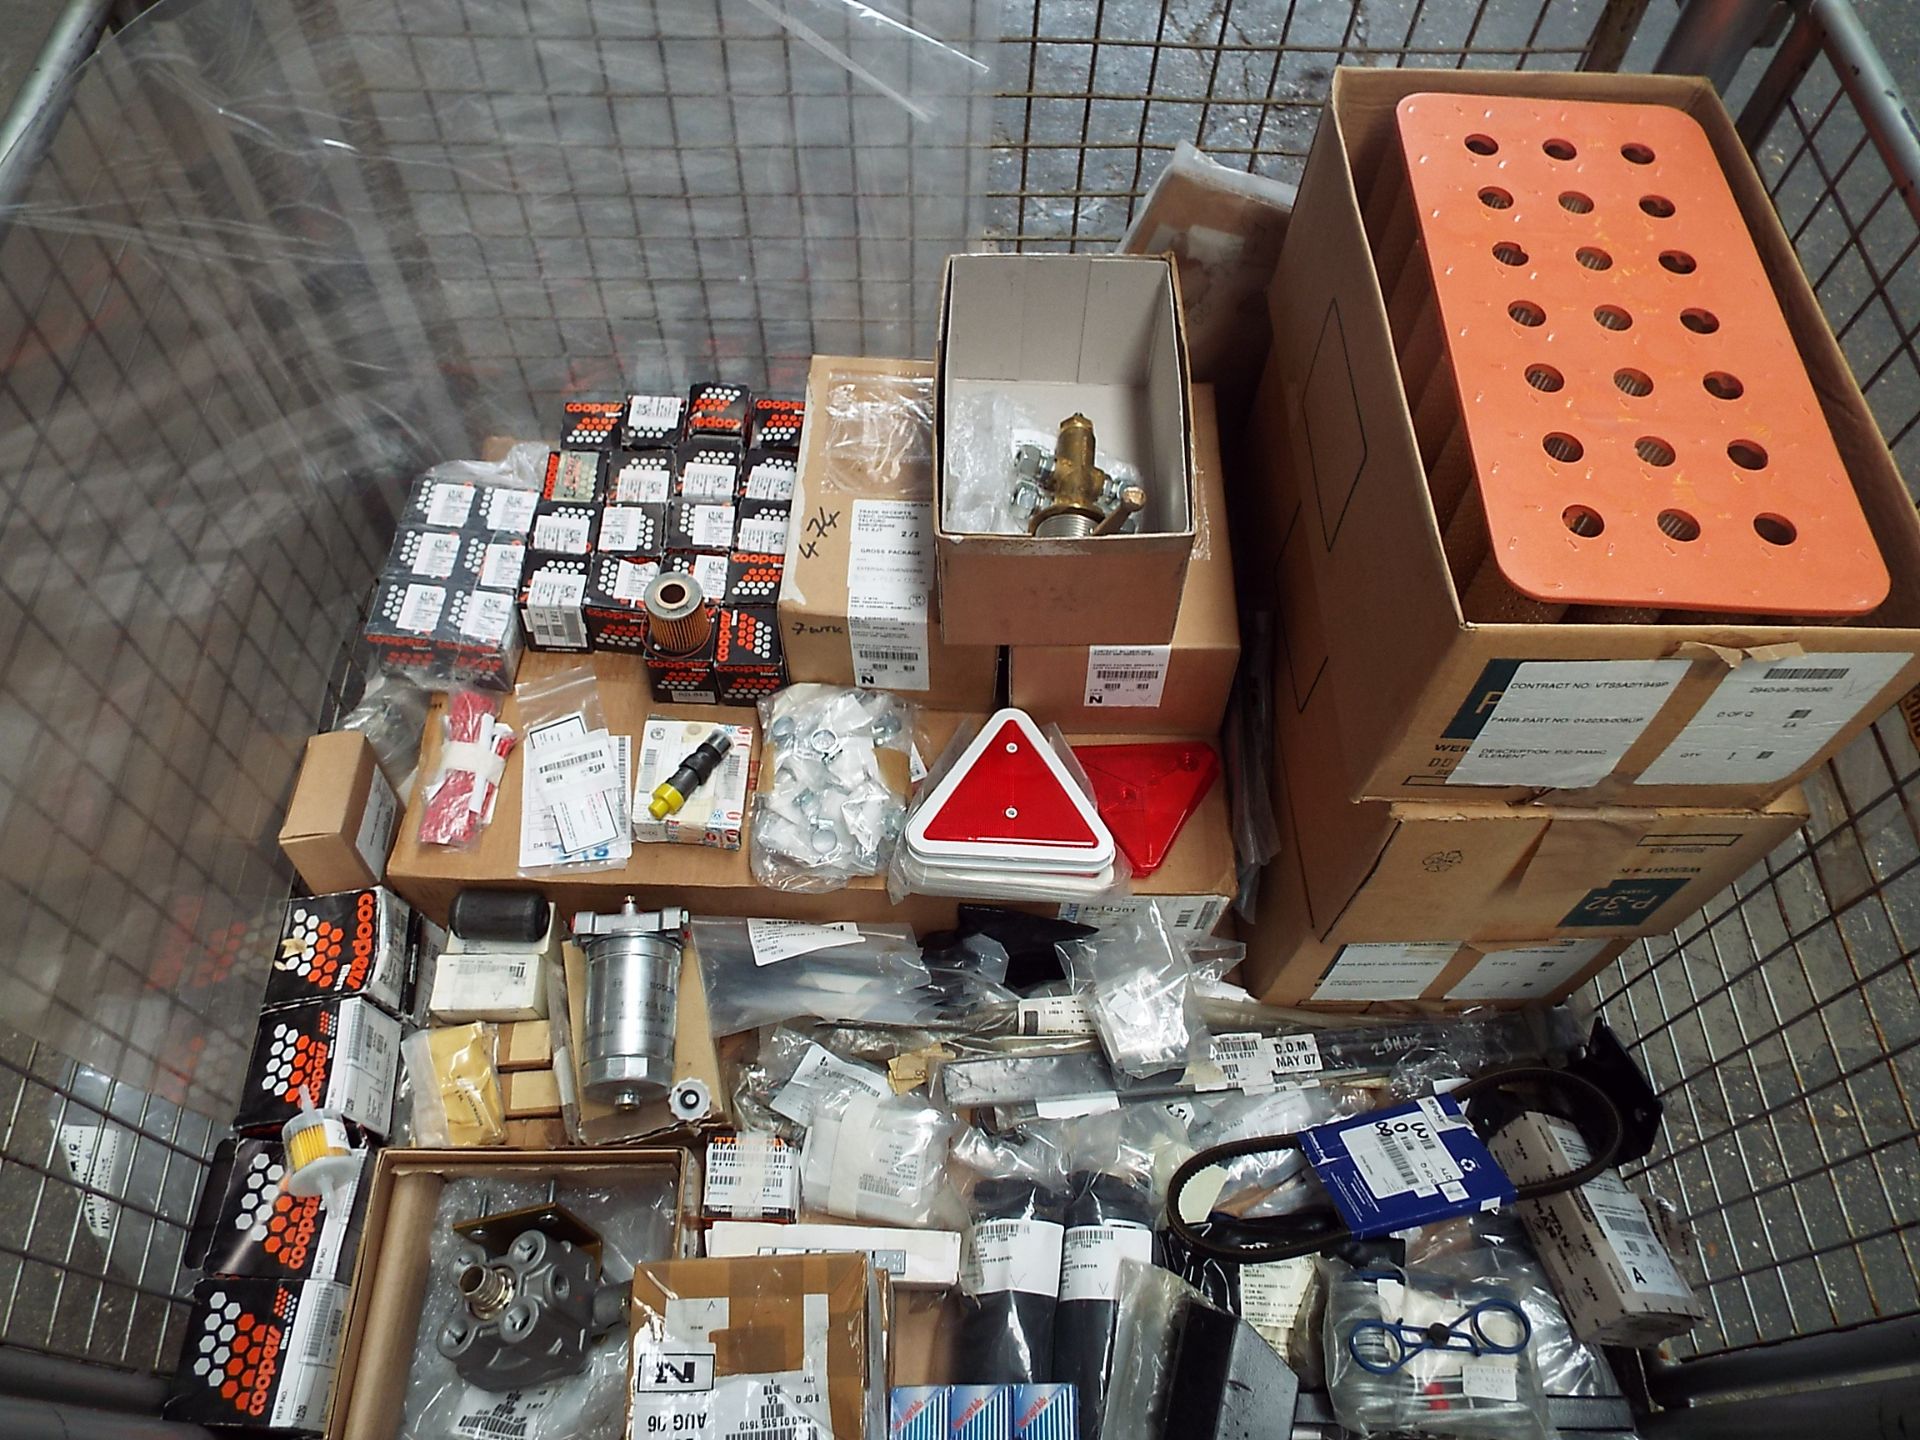 Mixed Stillage of Truck Parts inc Valves, Reflectors, Filters, Wheel Weights etc